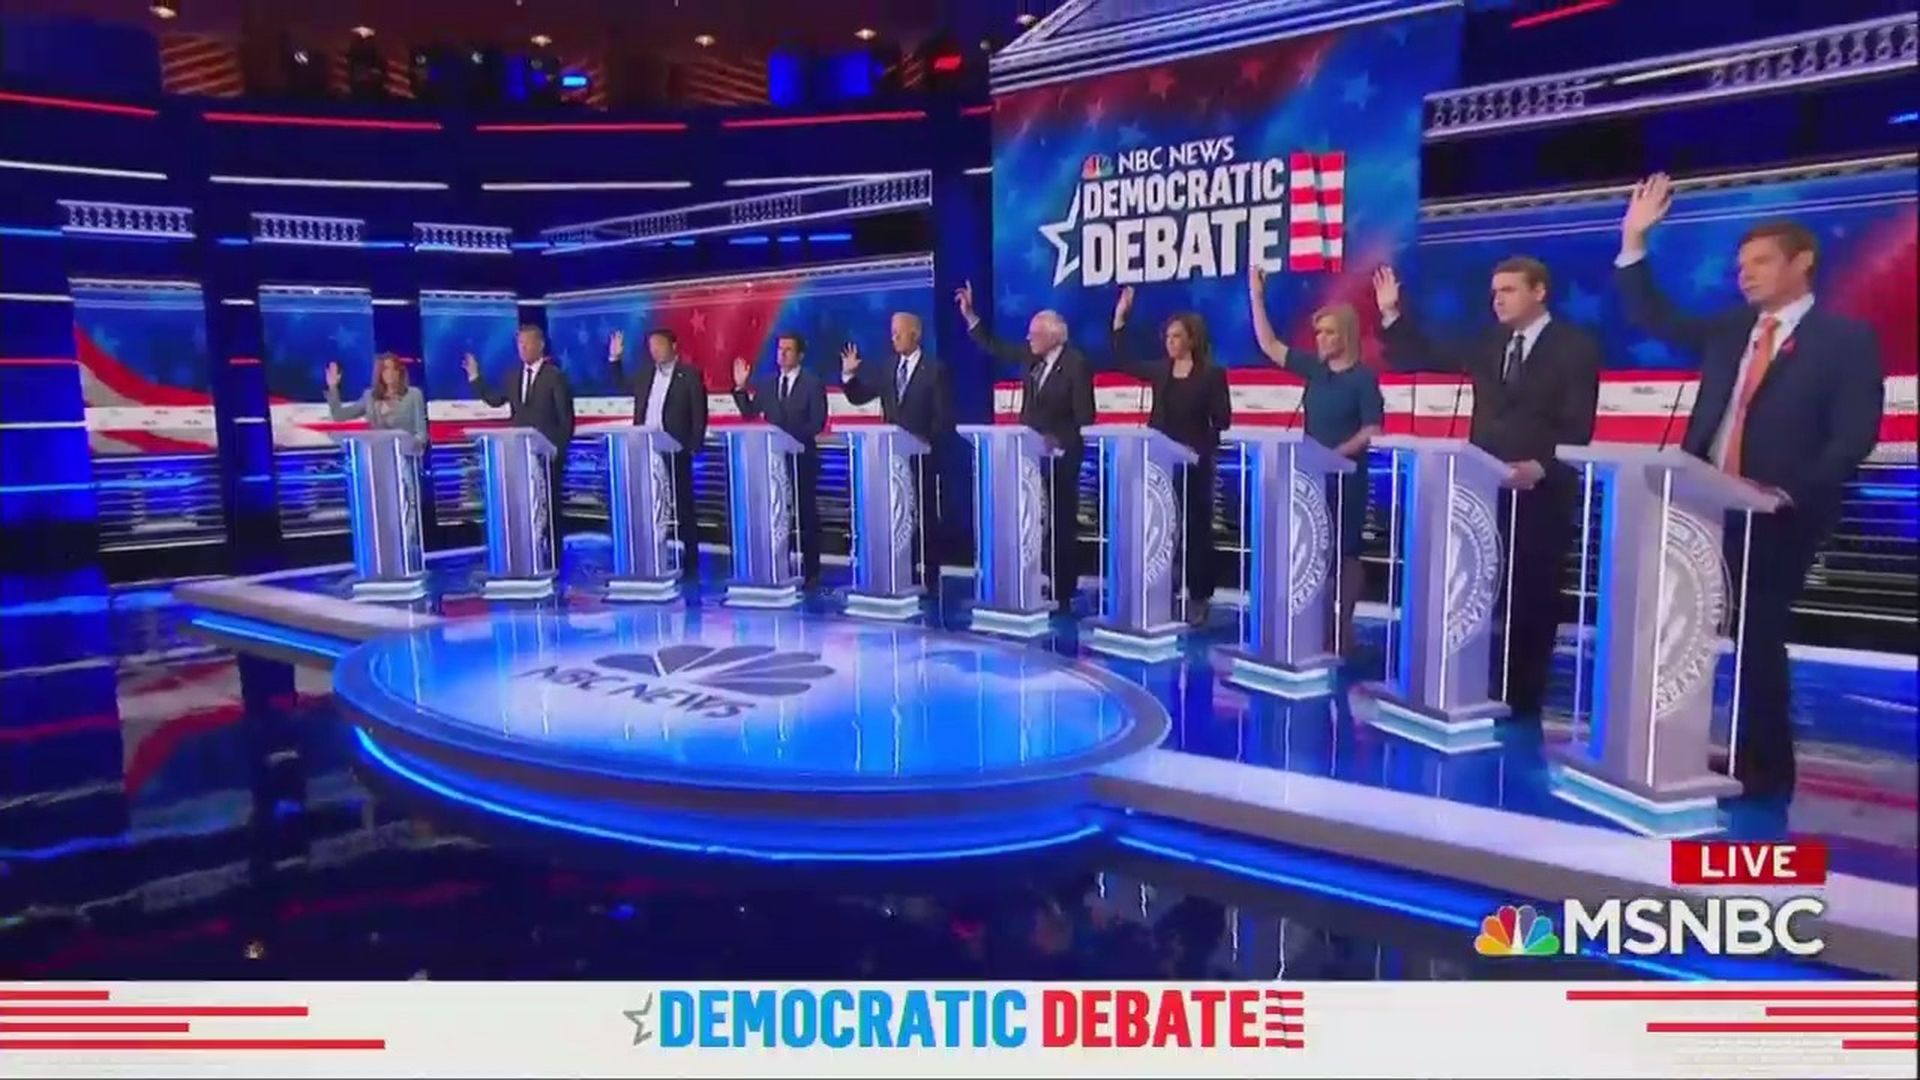 2020 Democratic candidates raise their hands on the debate stage supporting healthcare for undocumented migrants